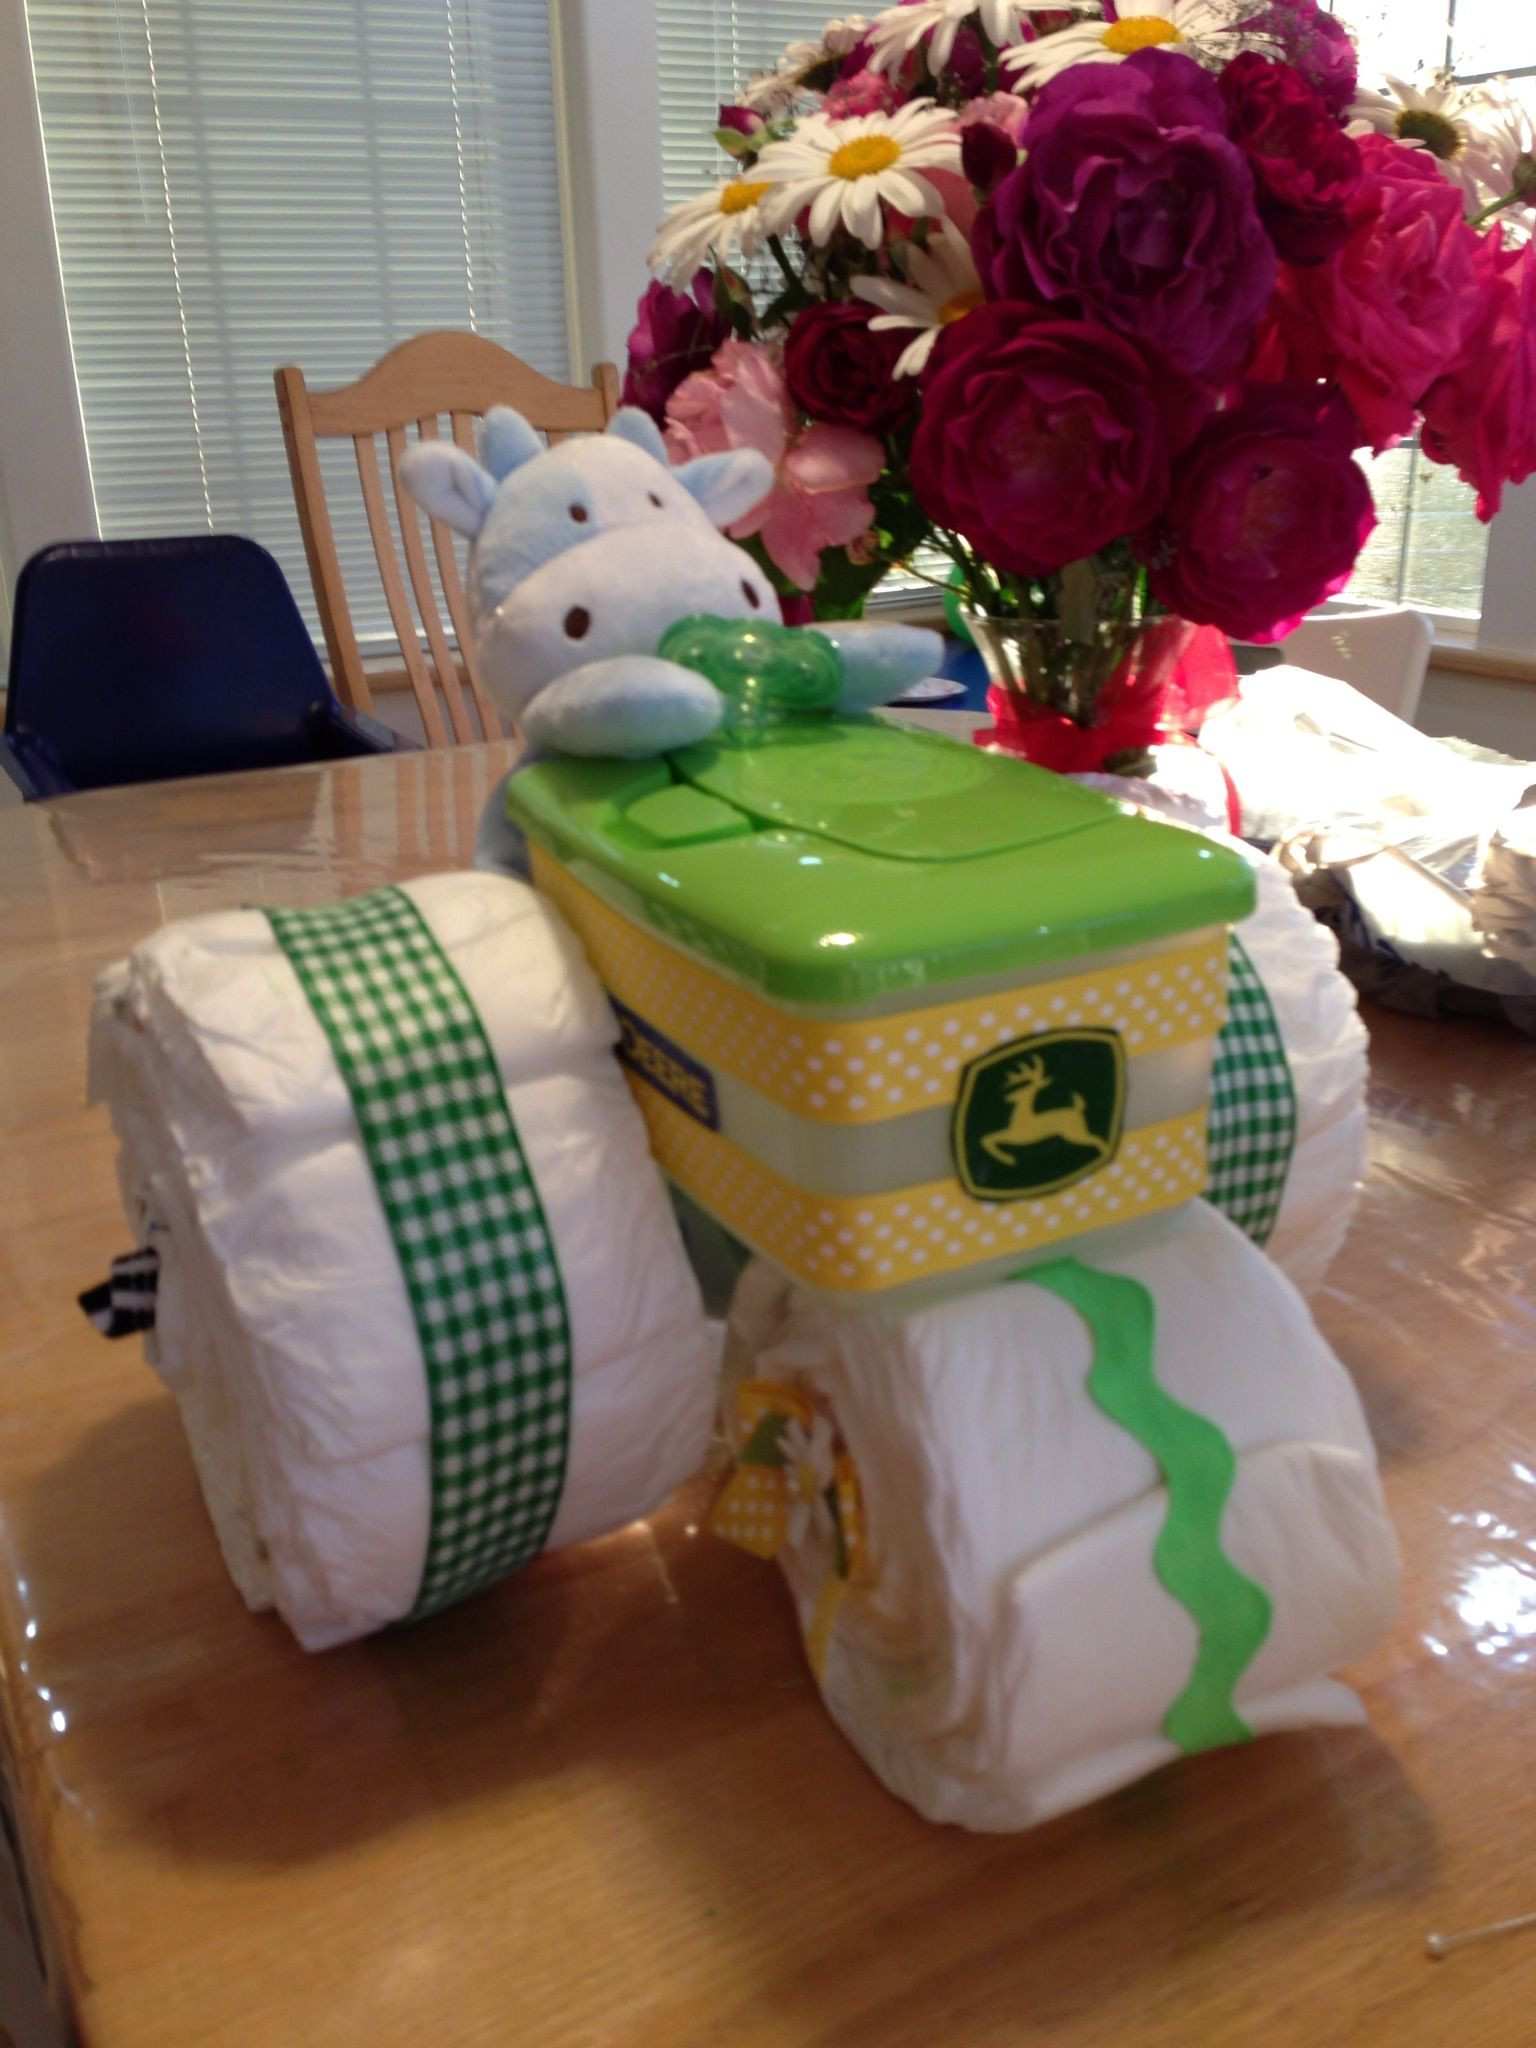 Crafty Baby Shower Gift Ideas
 Diaper tractor for my daughter s new baby